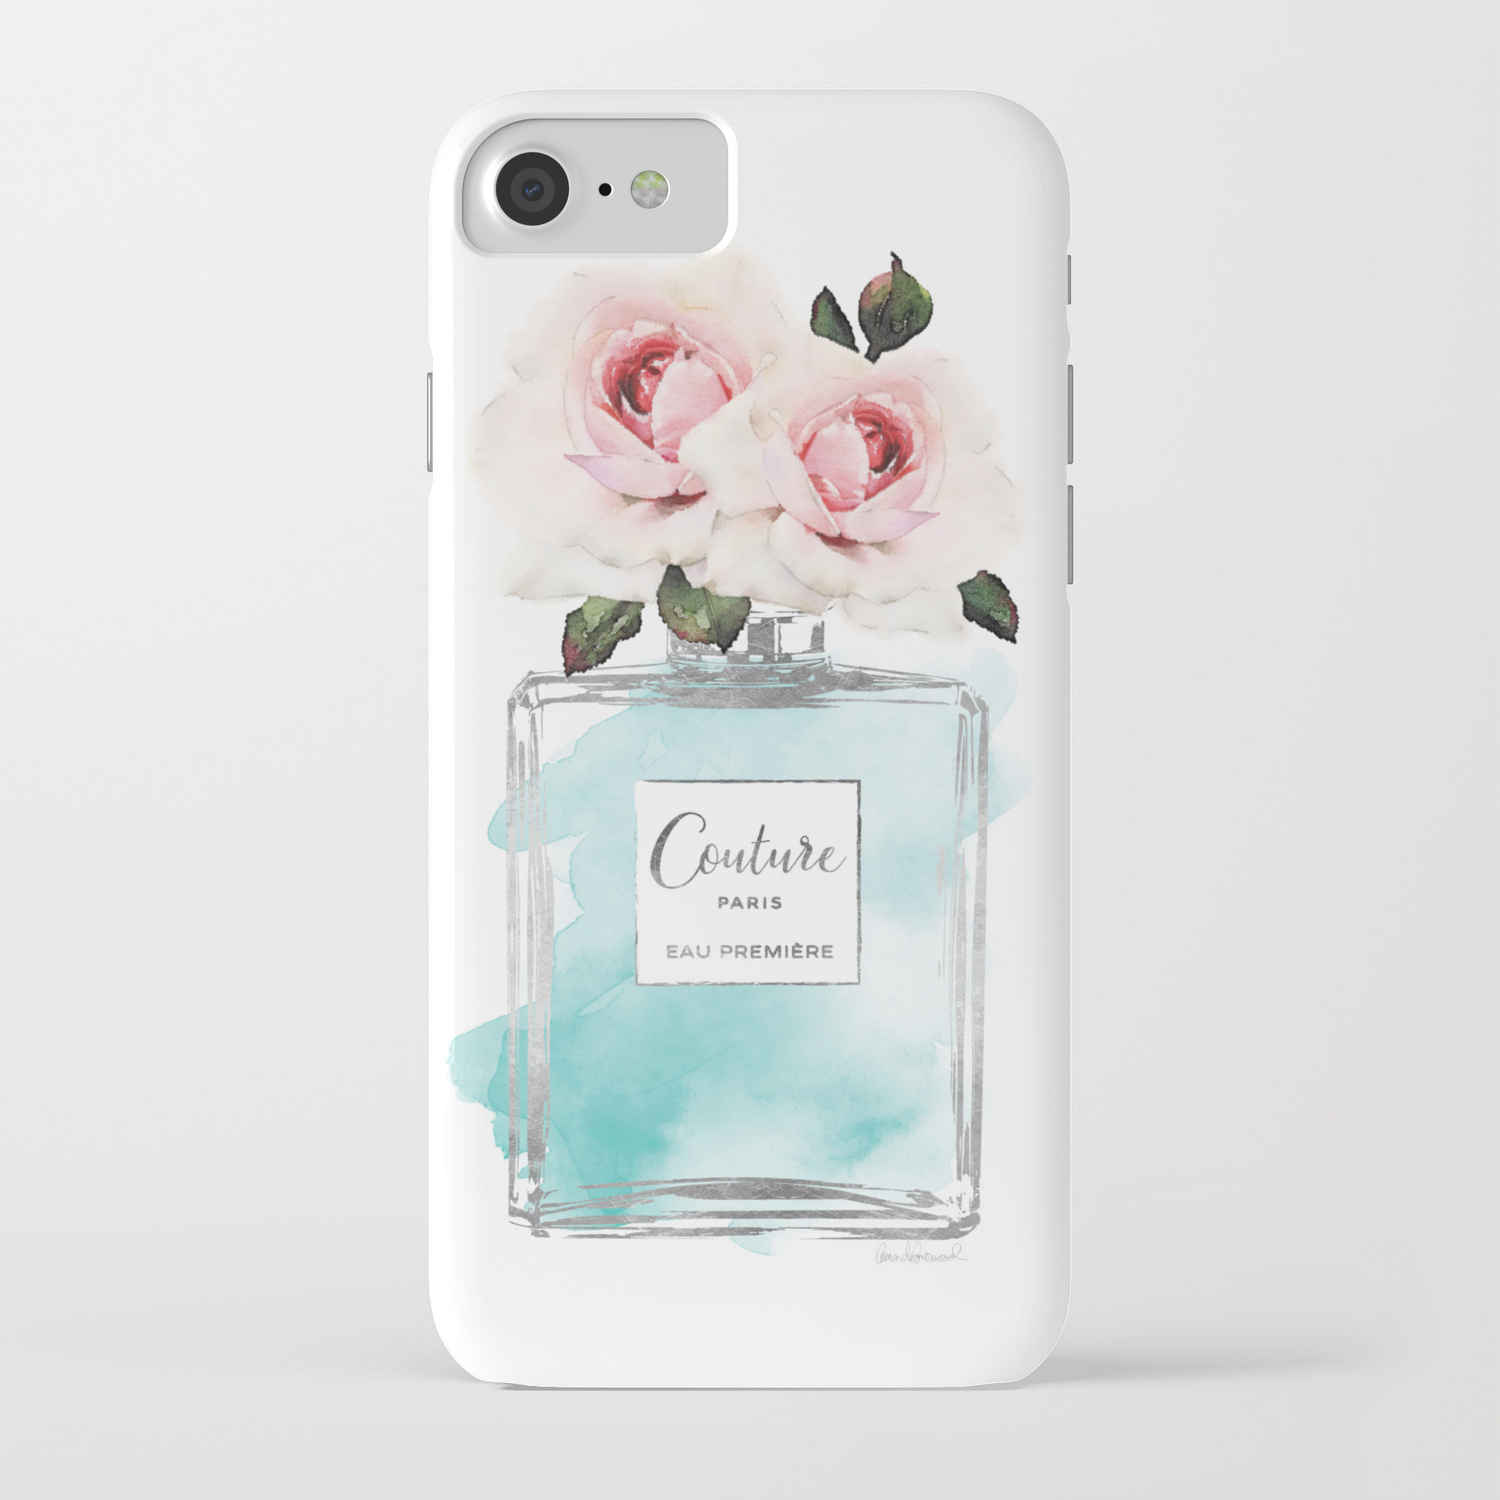 Perfume Watercolor Perfume Bottle With Flowers Teal Silver Peonies Fashion Illustration Iphone Case By Amandagreenwood Society6